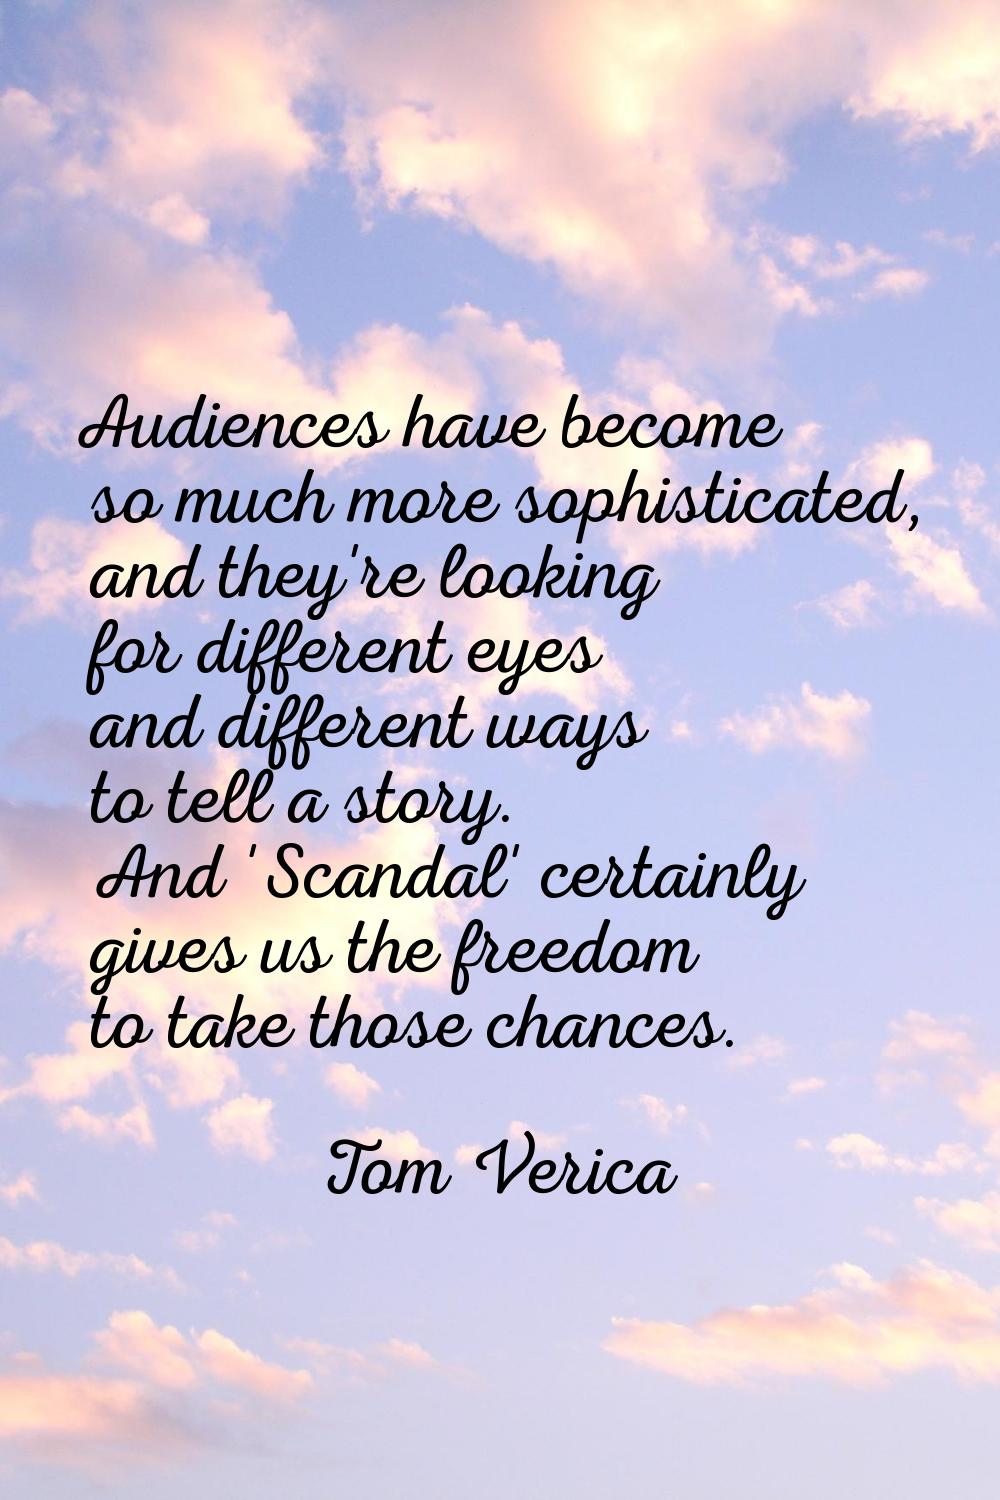 Audiences have become so much more sophisticated, and they're looking for different eyes and differ